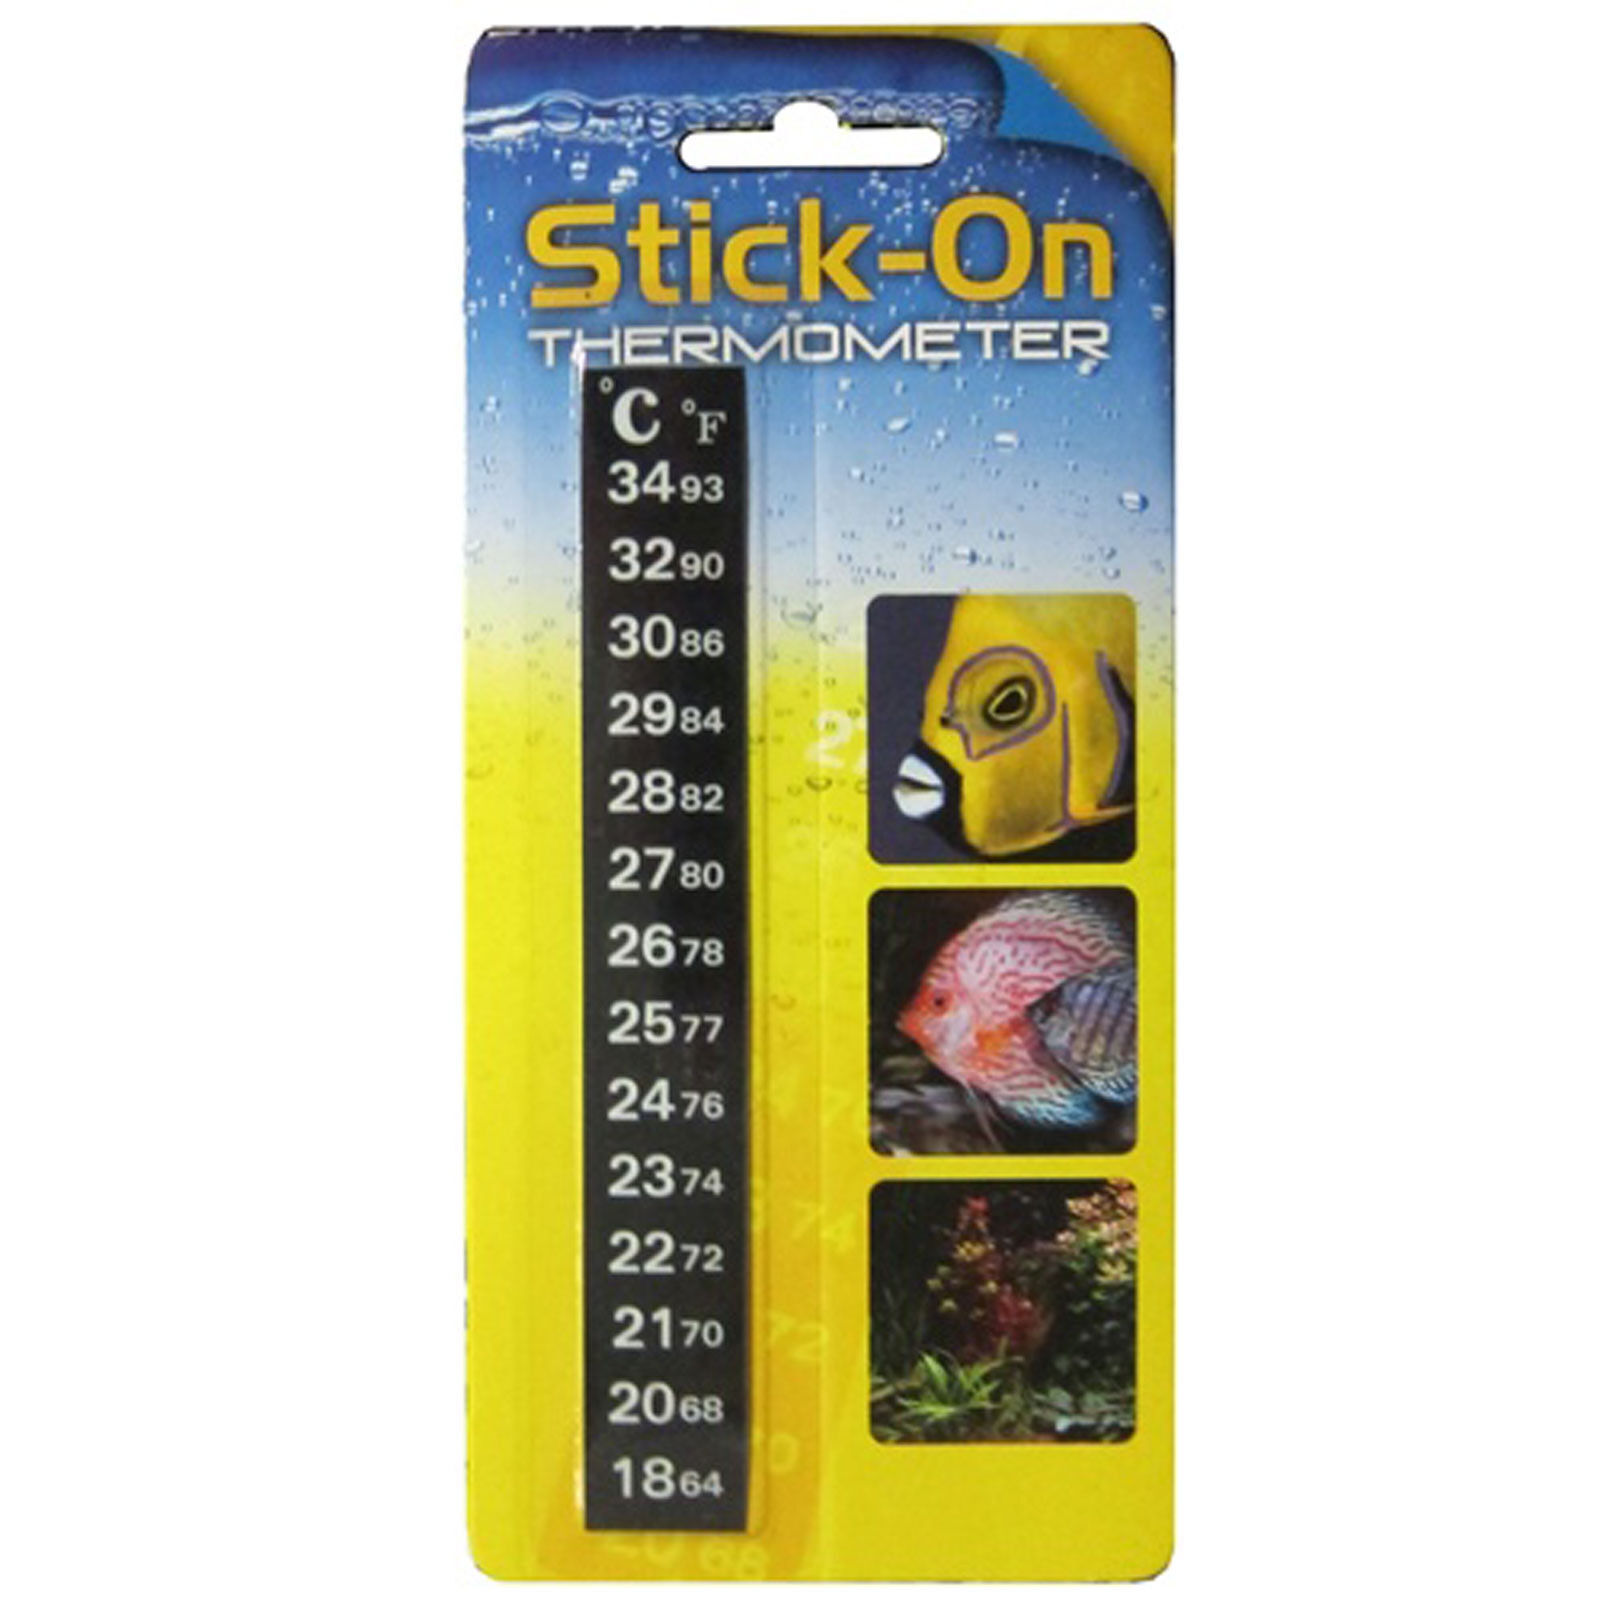 Stick On Thermometer Self Adhesive Thermal Strip FREE USA SHIPPING